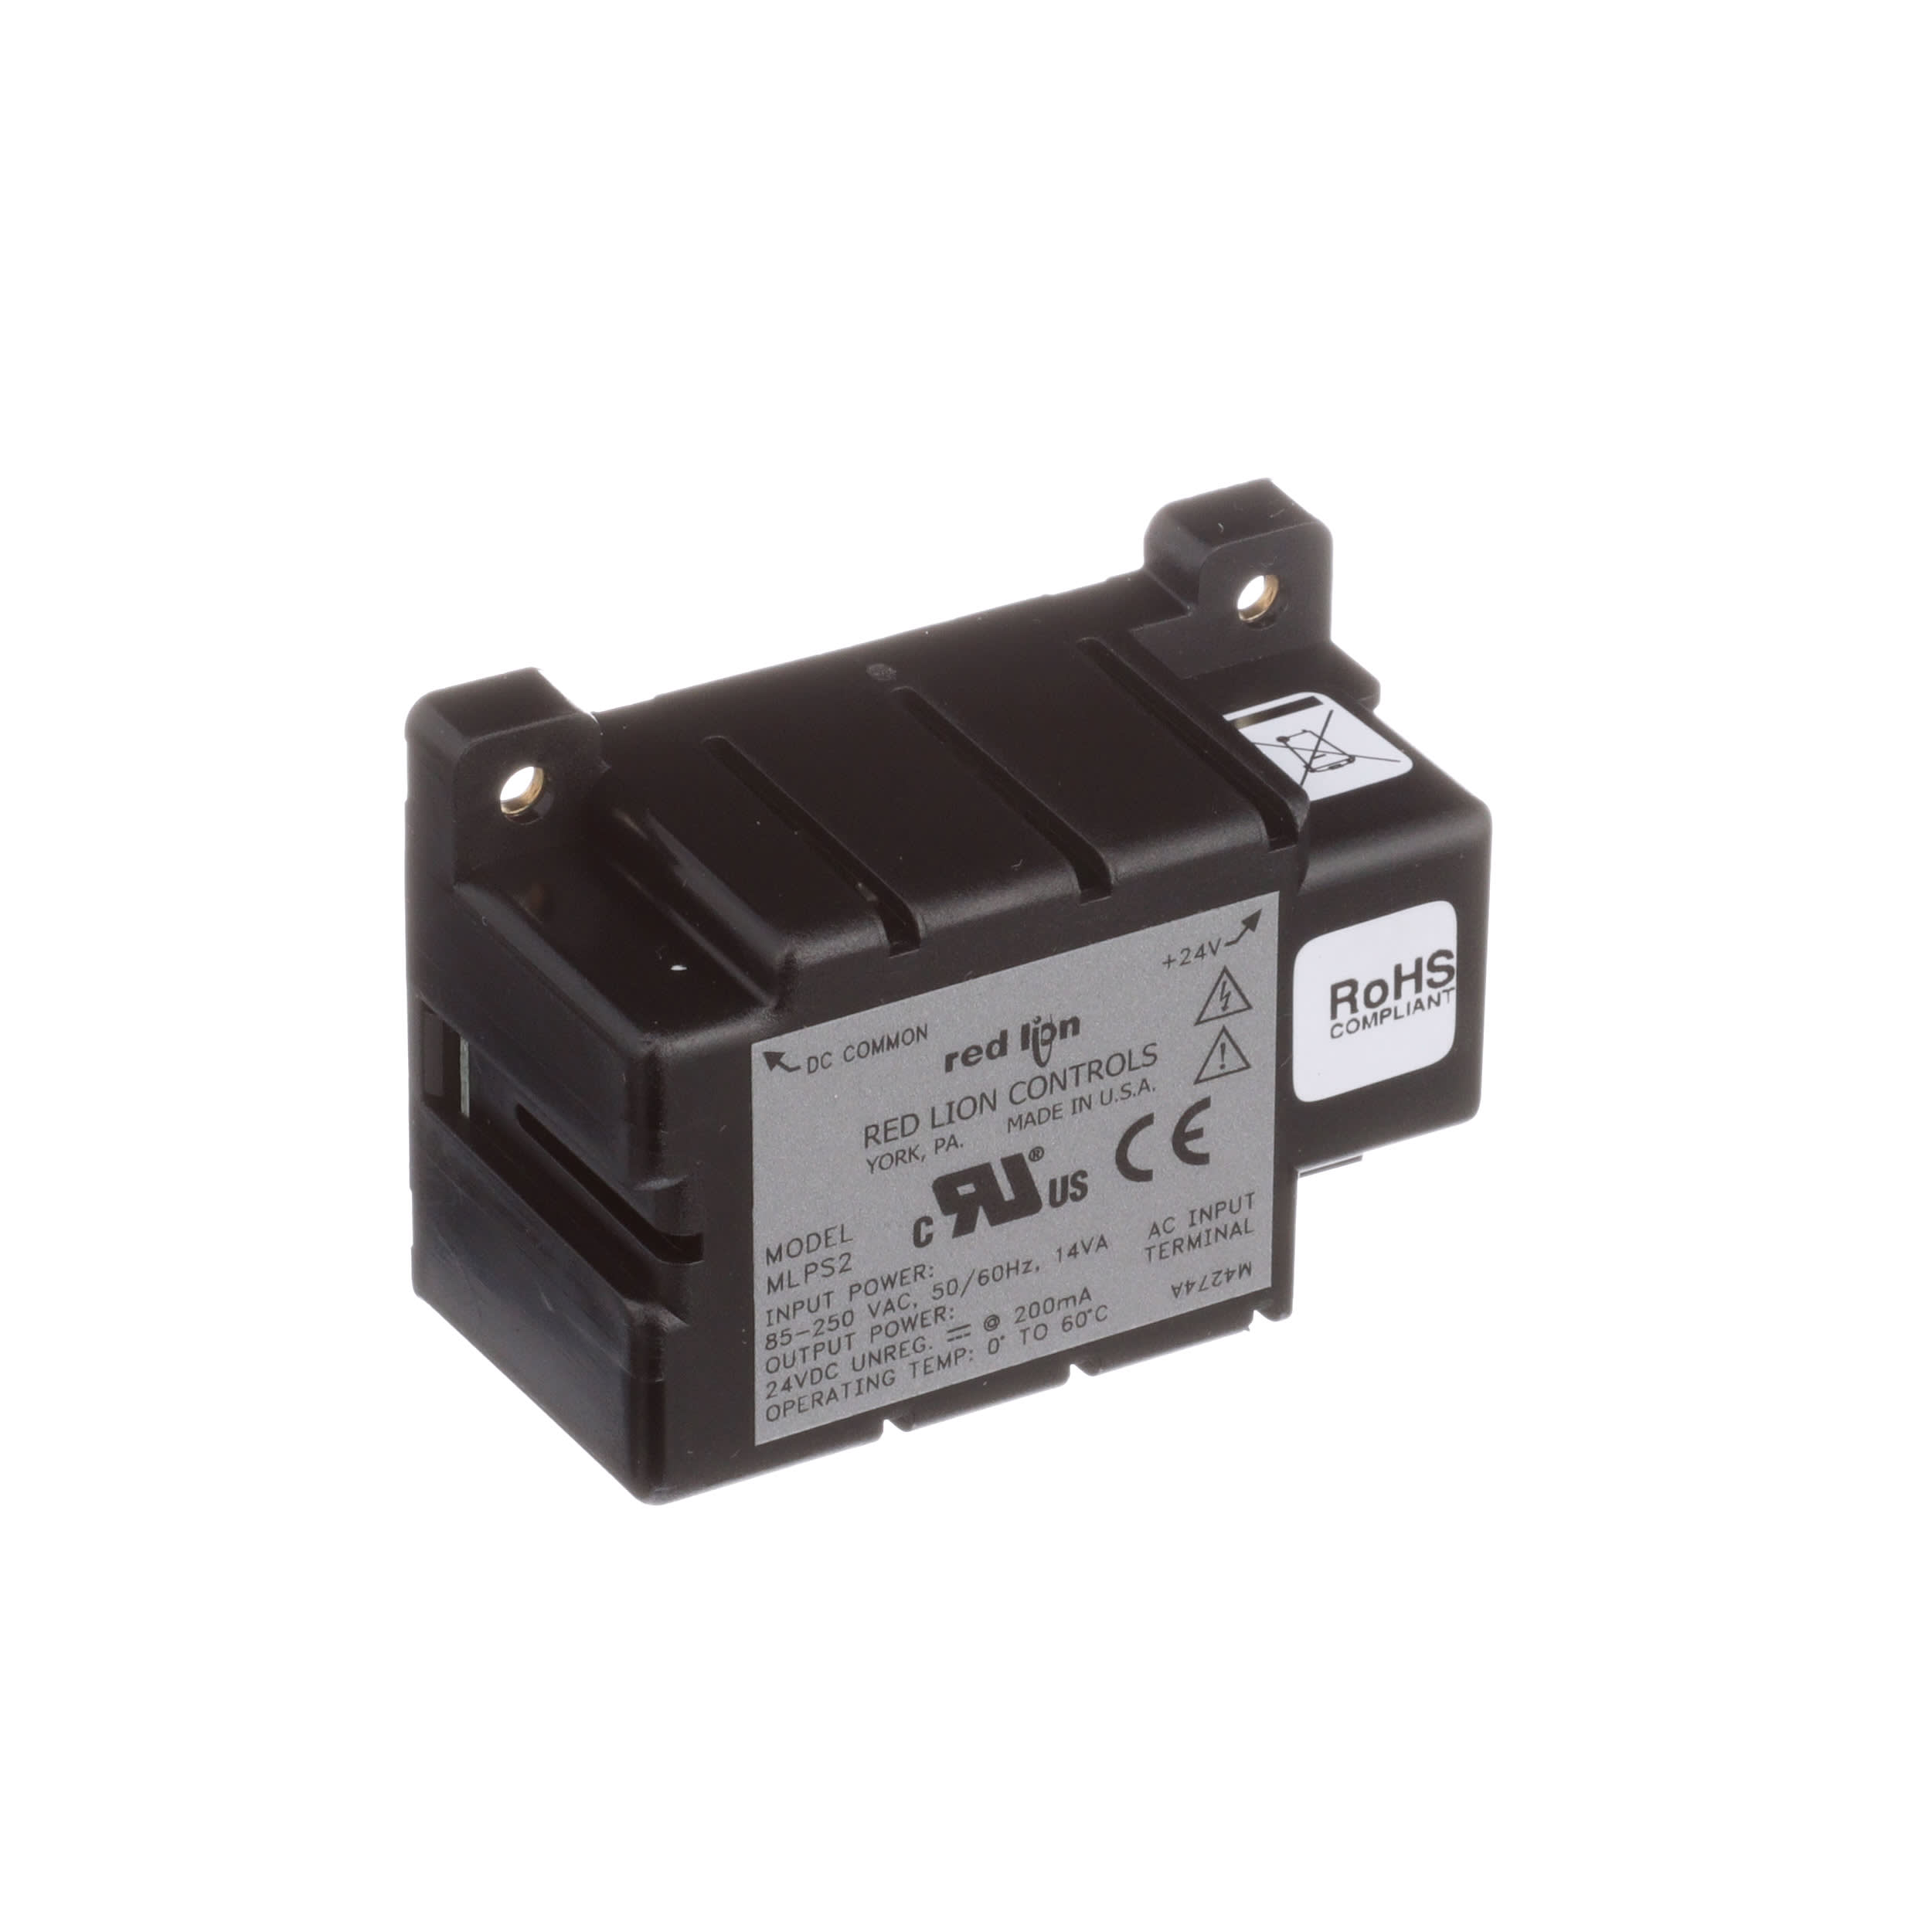 Red Lion CUB4 24VDC Counter 